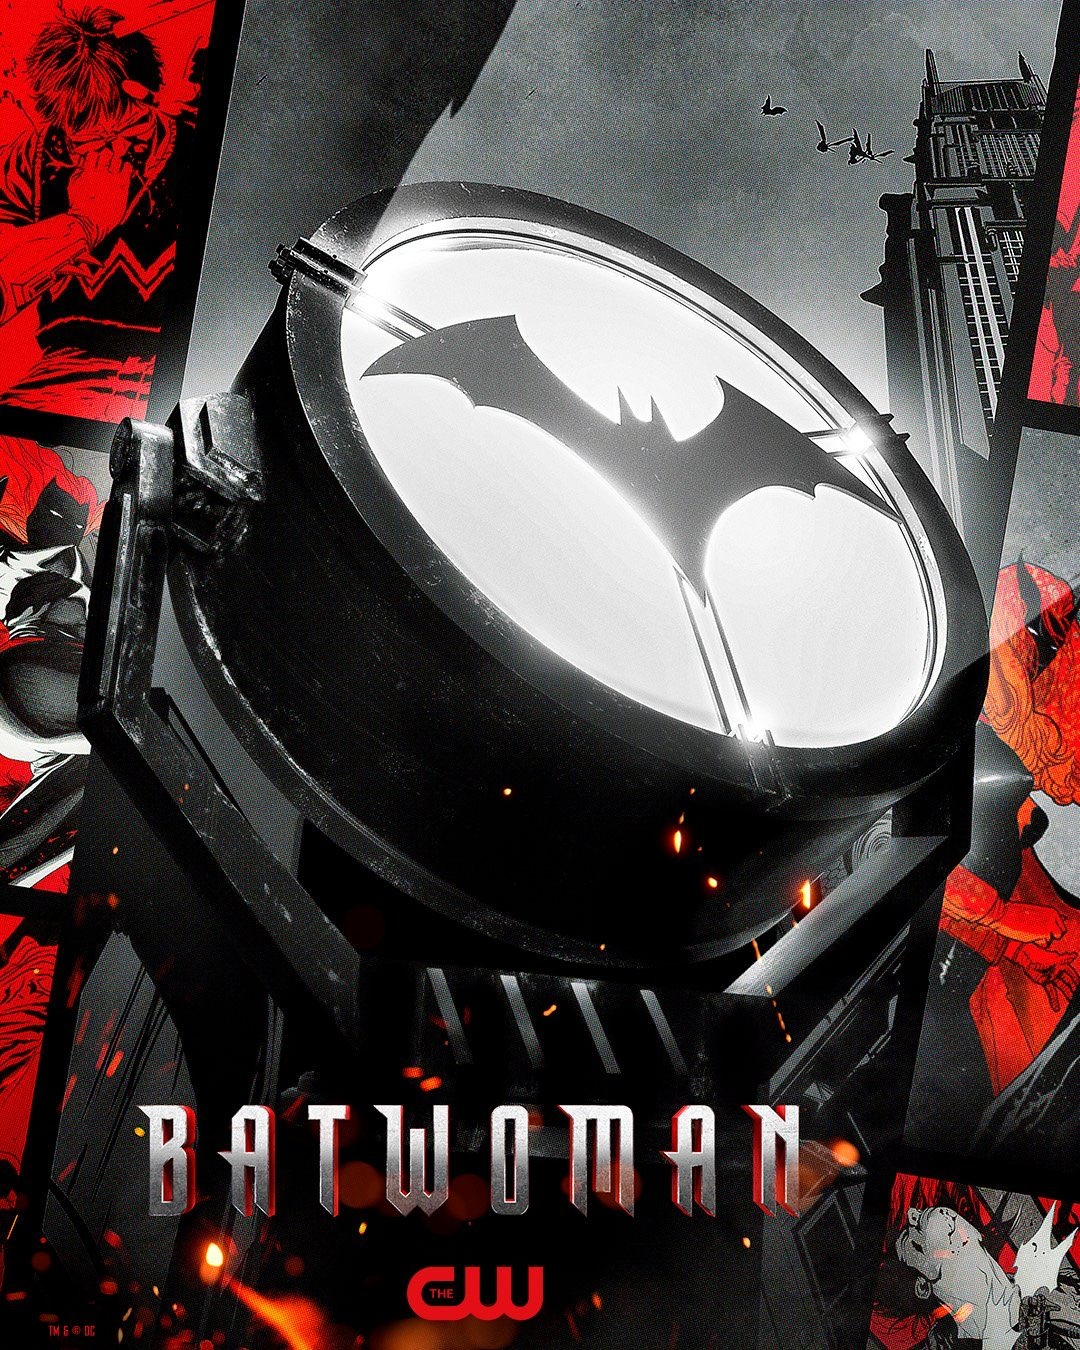 Extra Large Movie Poster Image for Batwoman (#16 of 30)